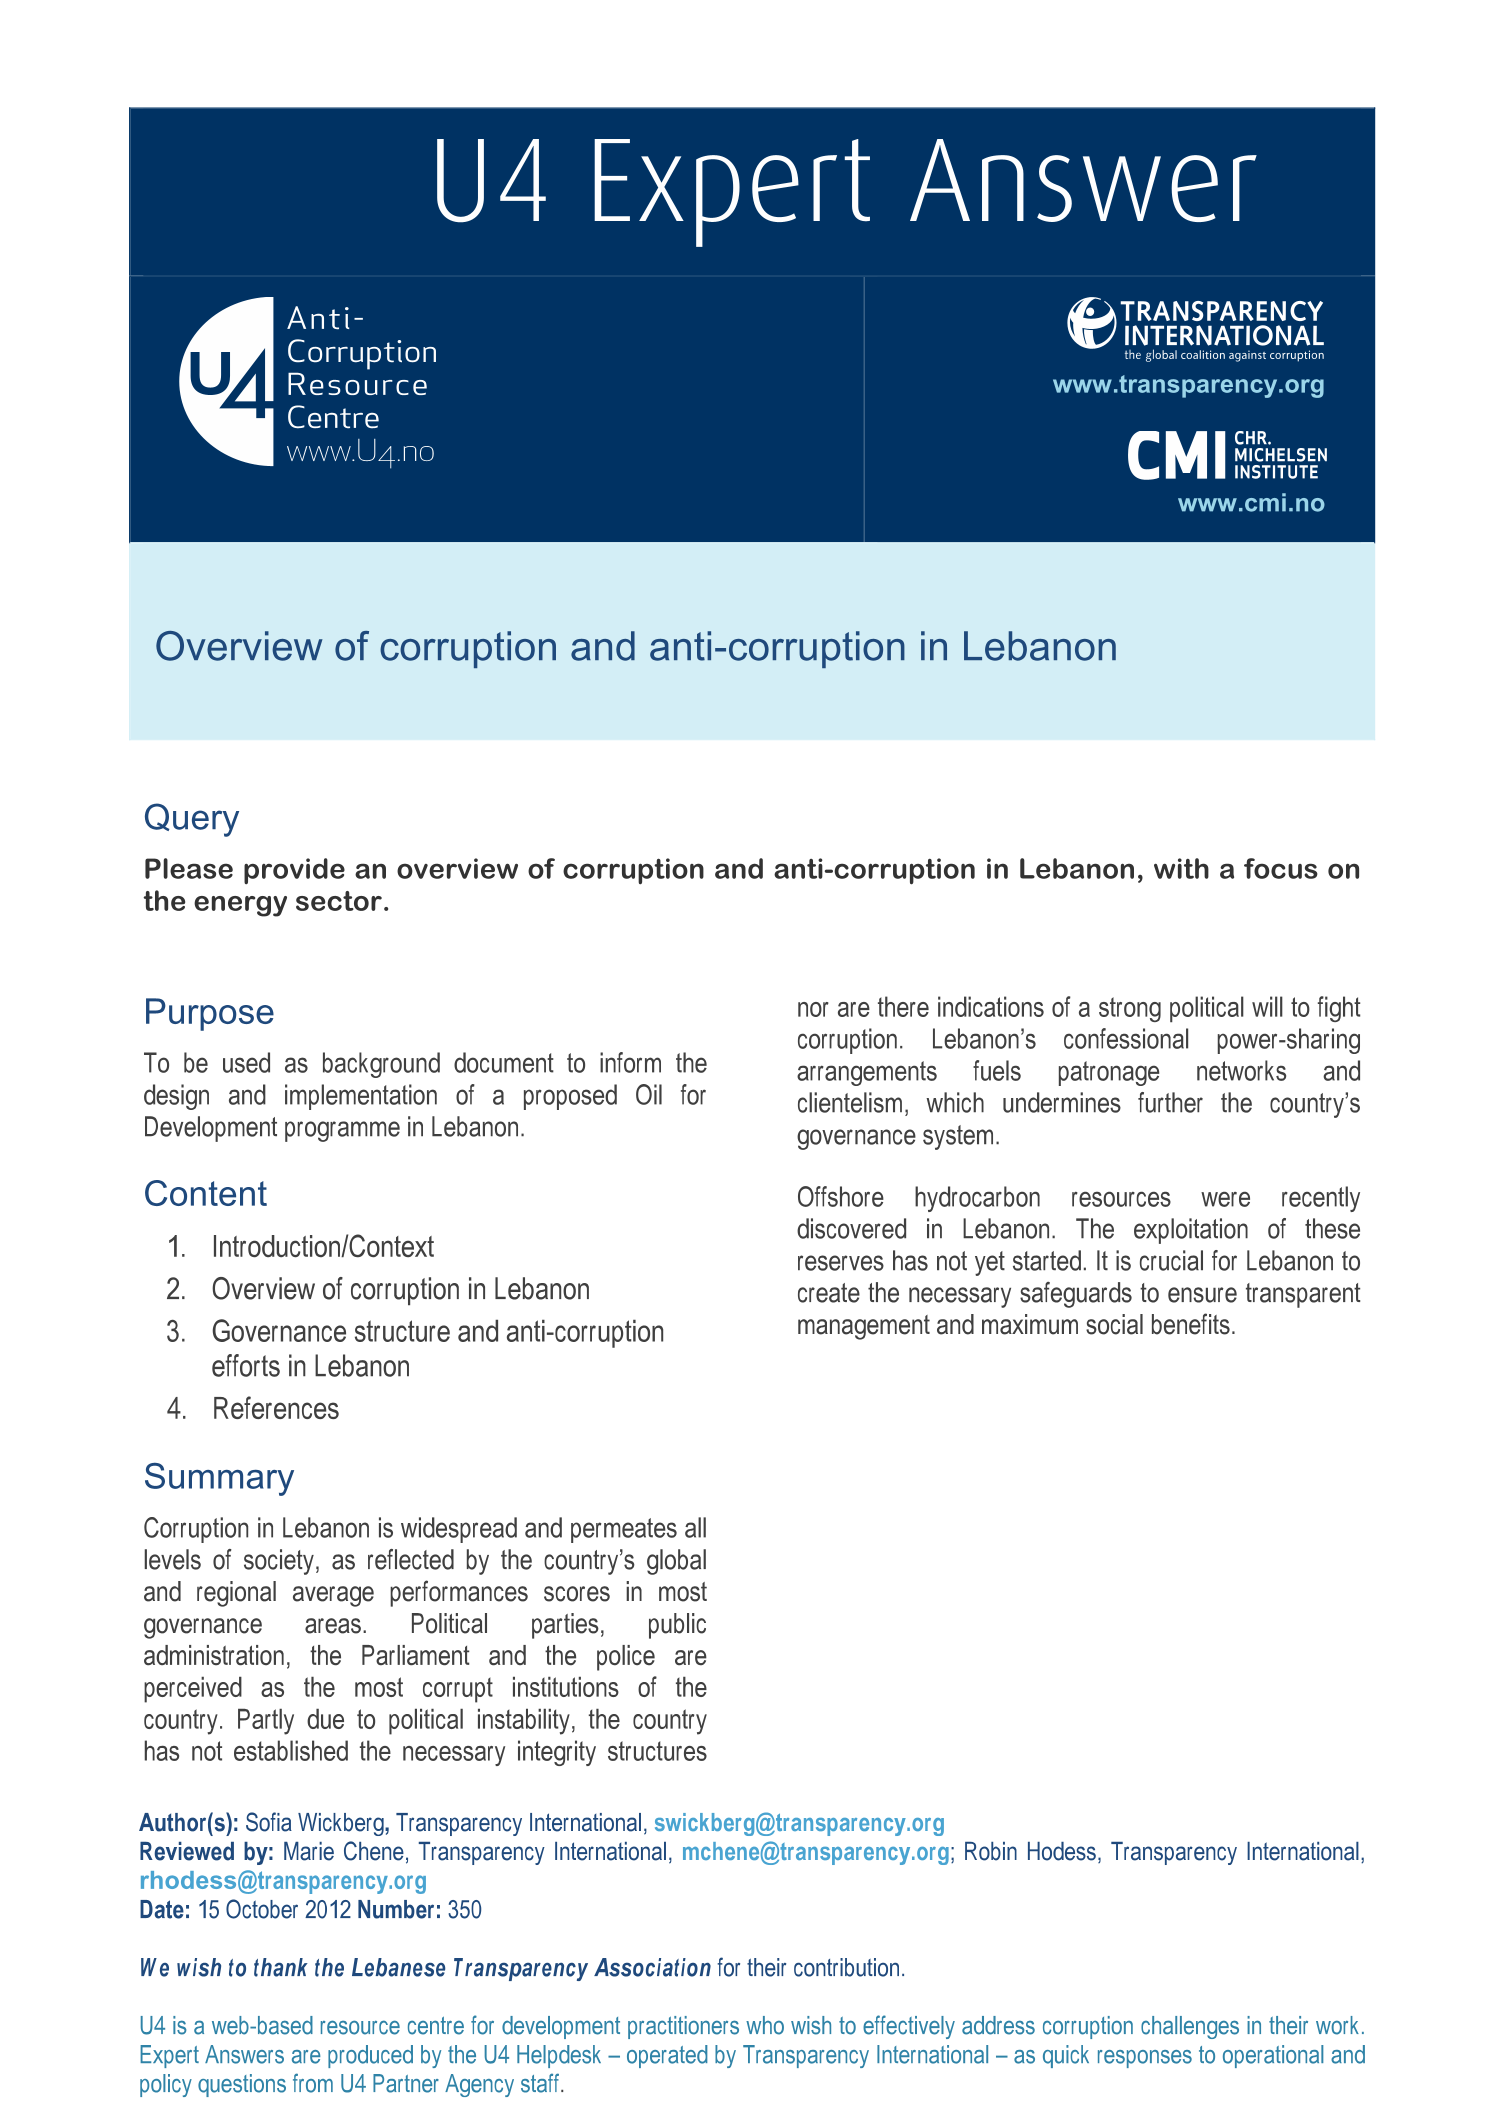 Overview of corruption and anti-corruption in Lebanon